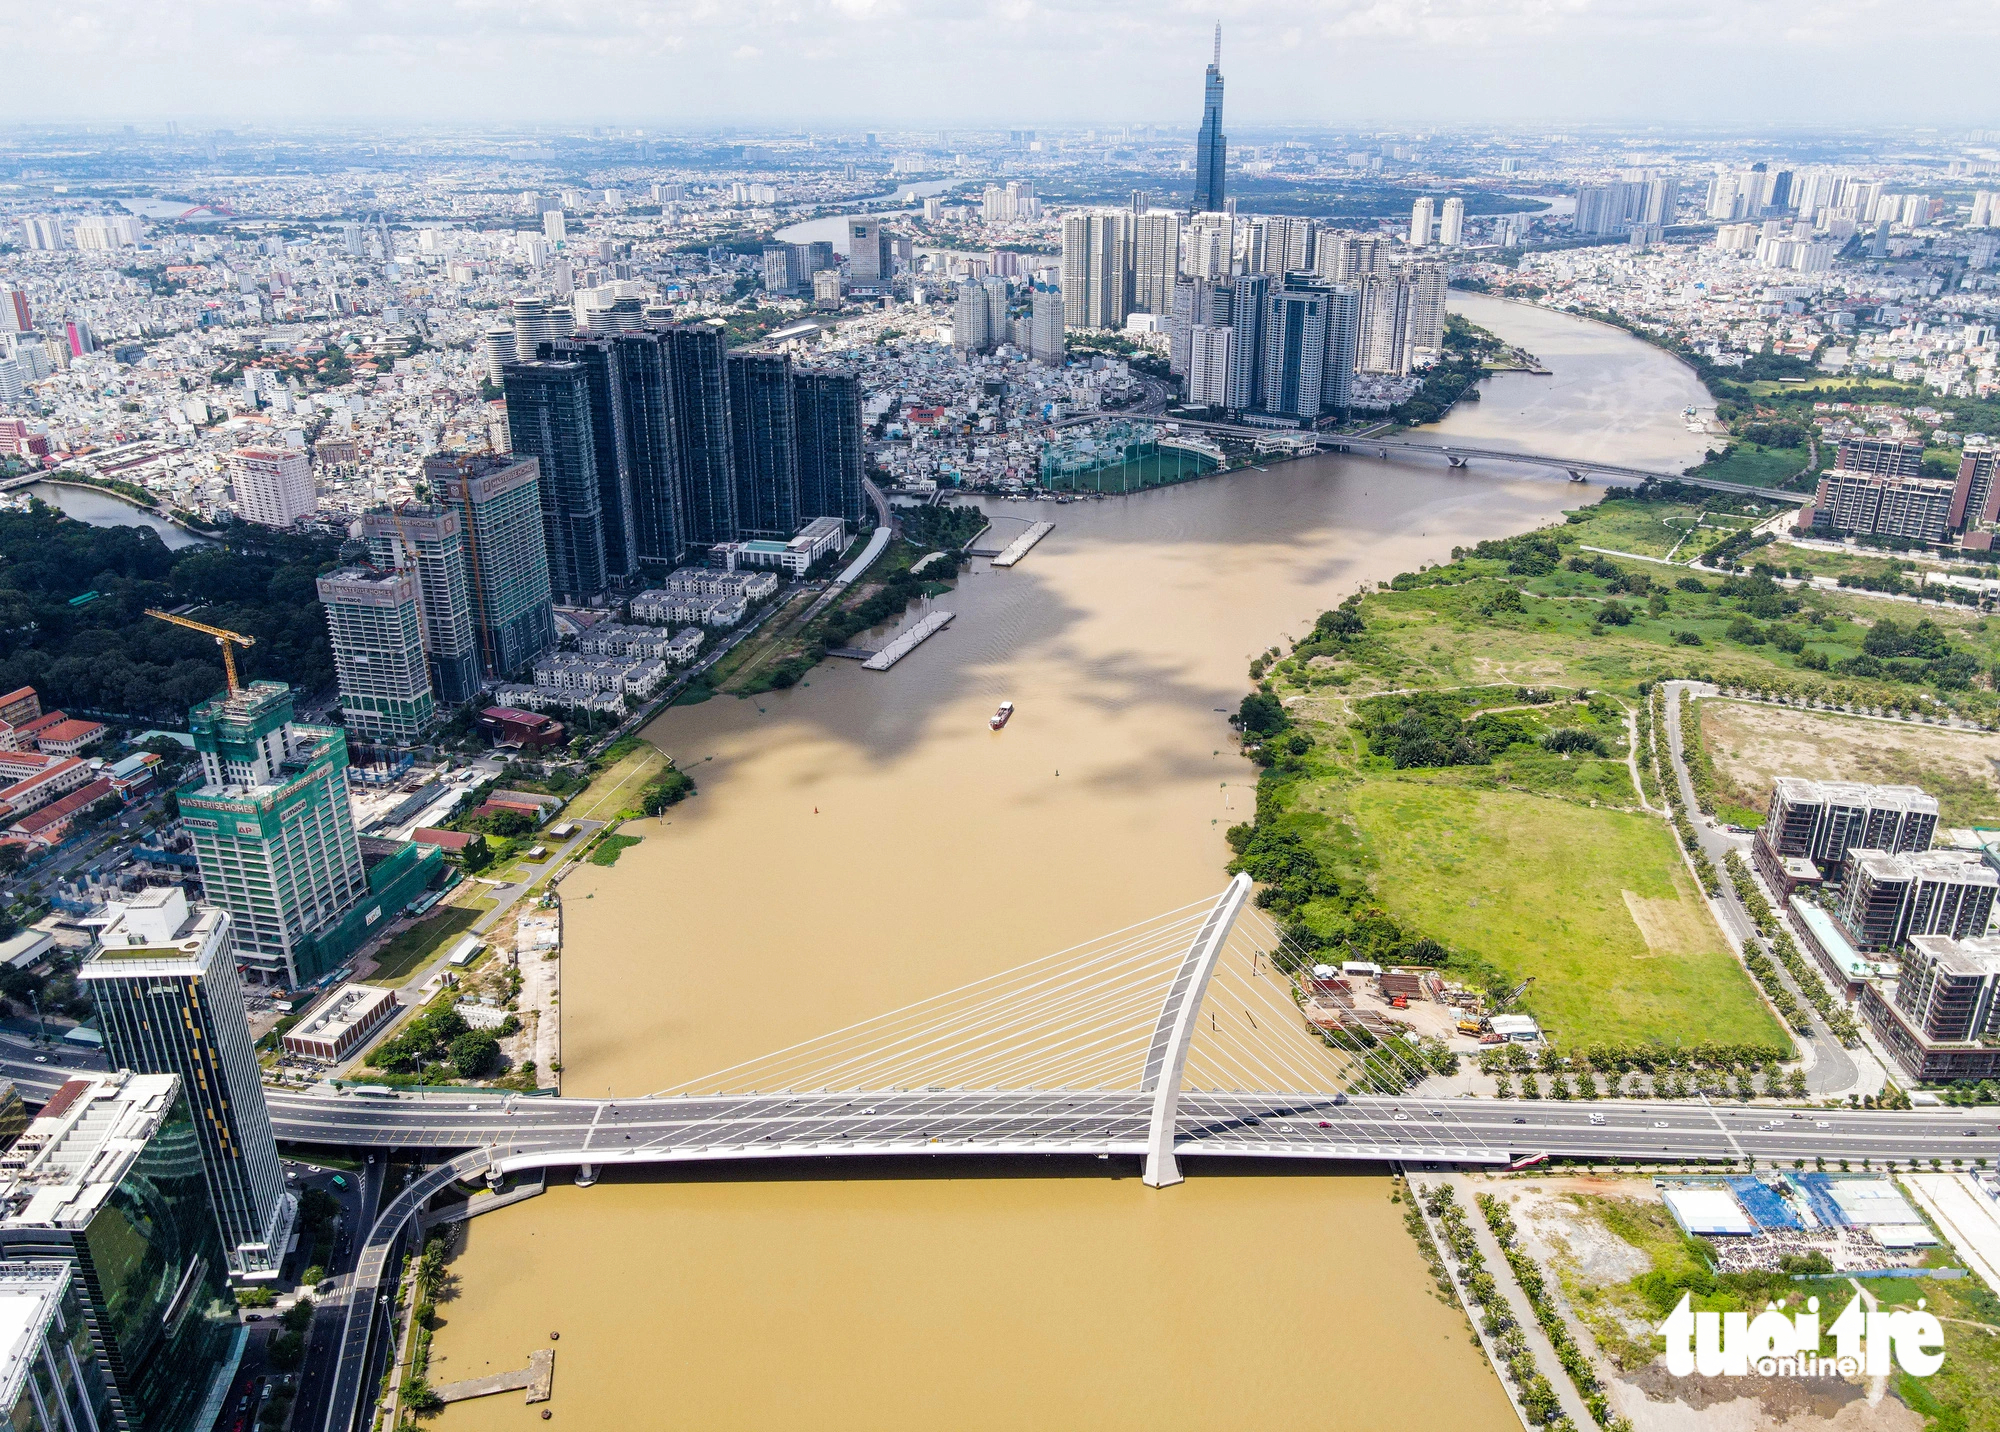 Ho Chi Minh City was set to develop a riverside road which would link Nguyen Huu Canh Street, which lies in District 1 and Binh Thanh District, with the Kinh Bridge in Thanh Da Peninsula in Binh Thanh. Photo: Tuoi Tre